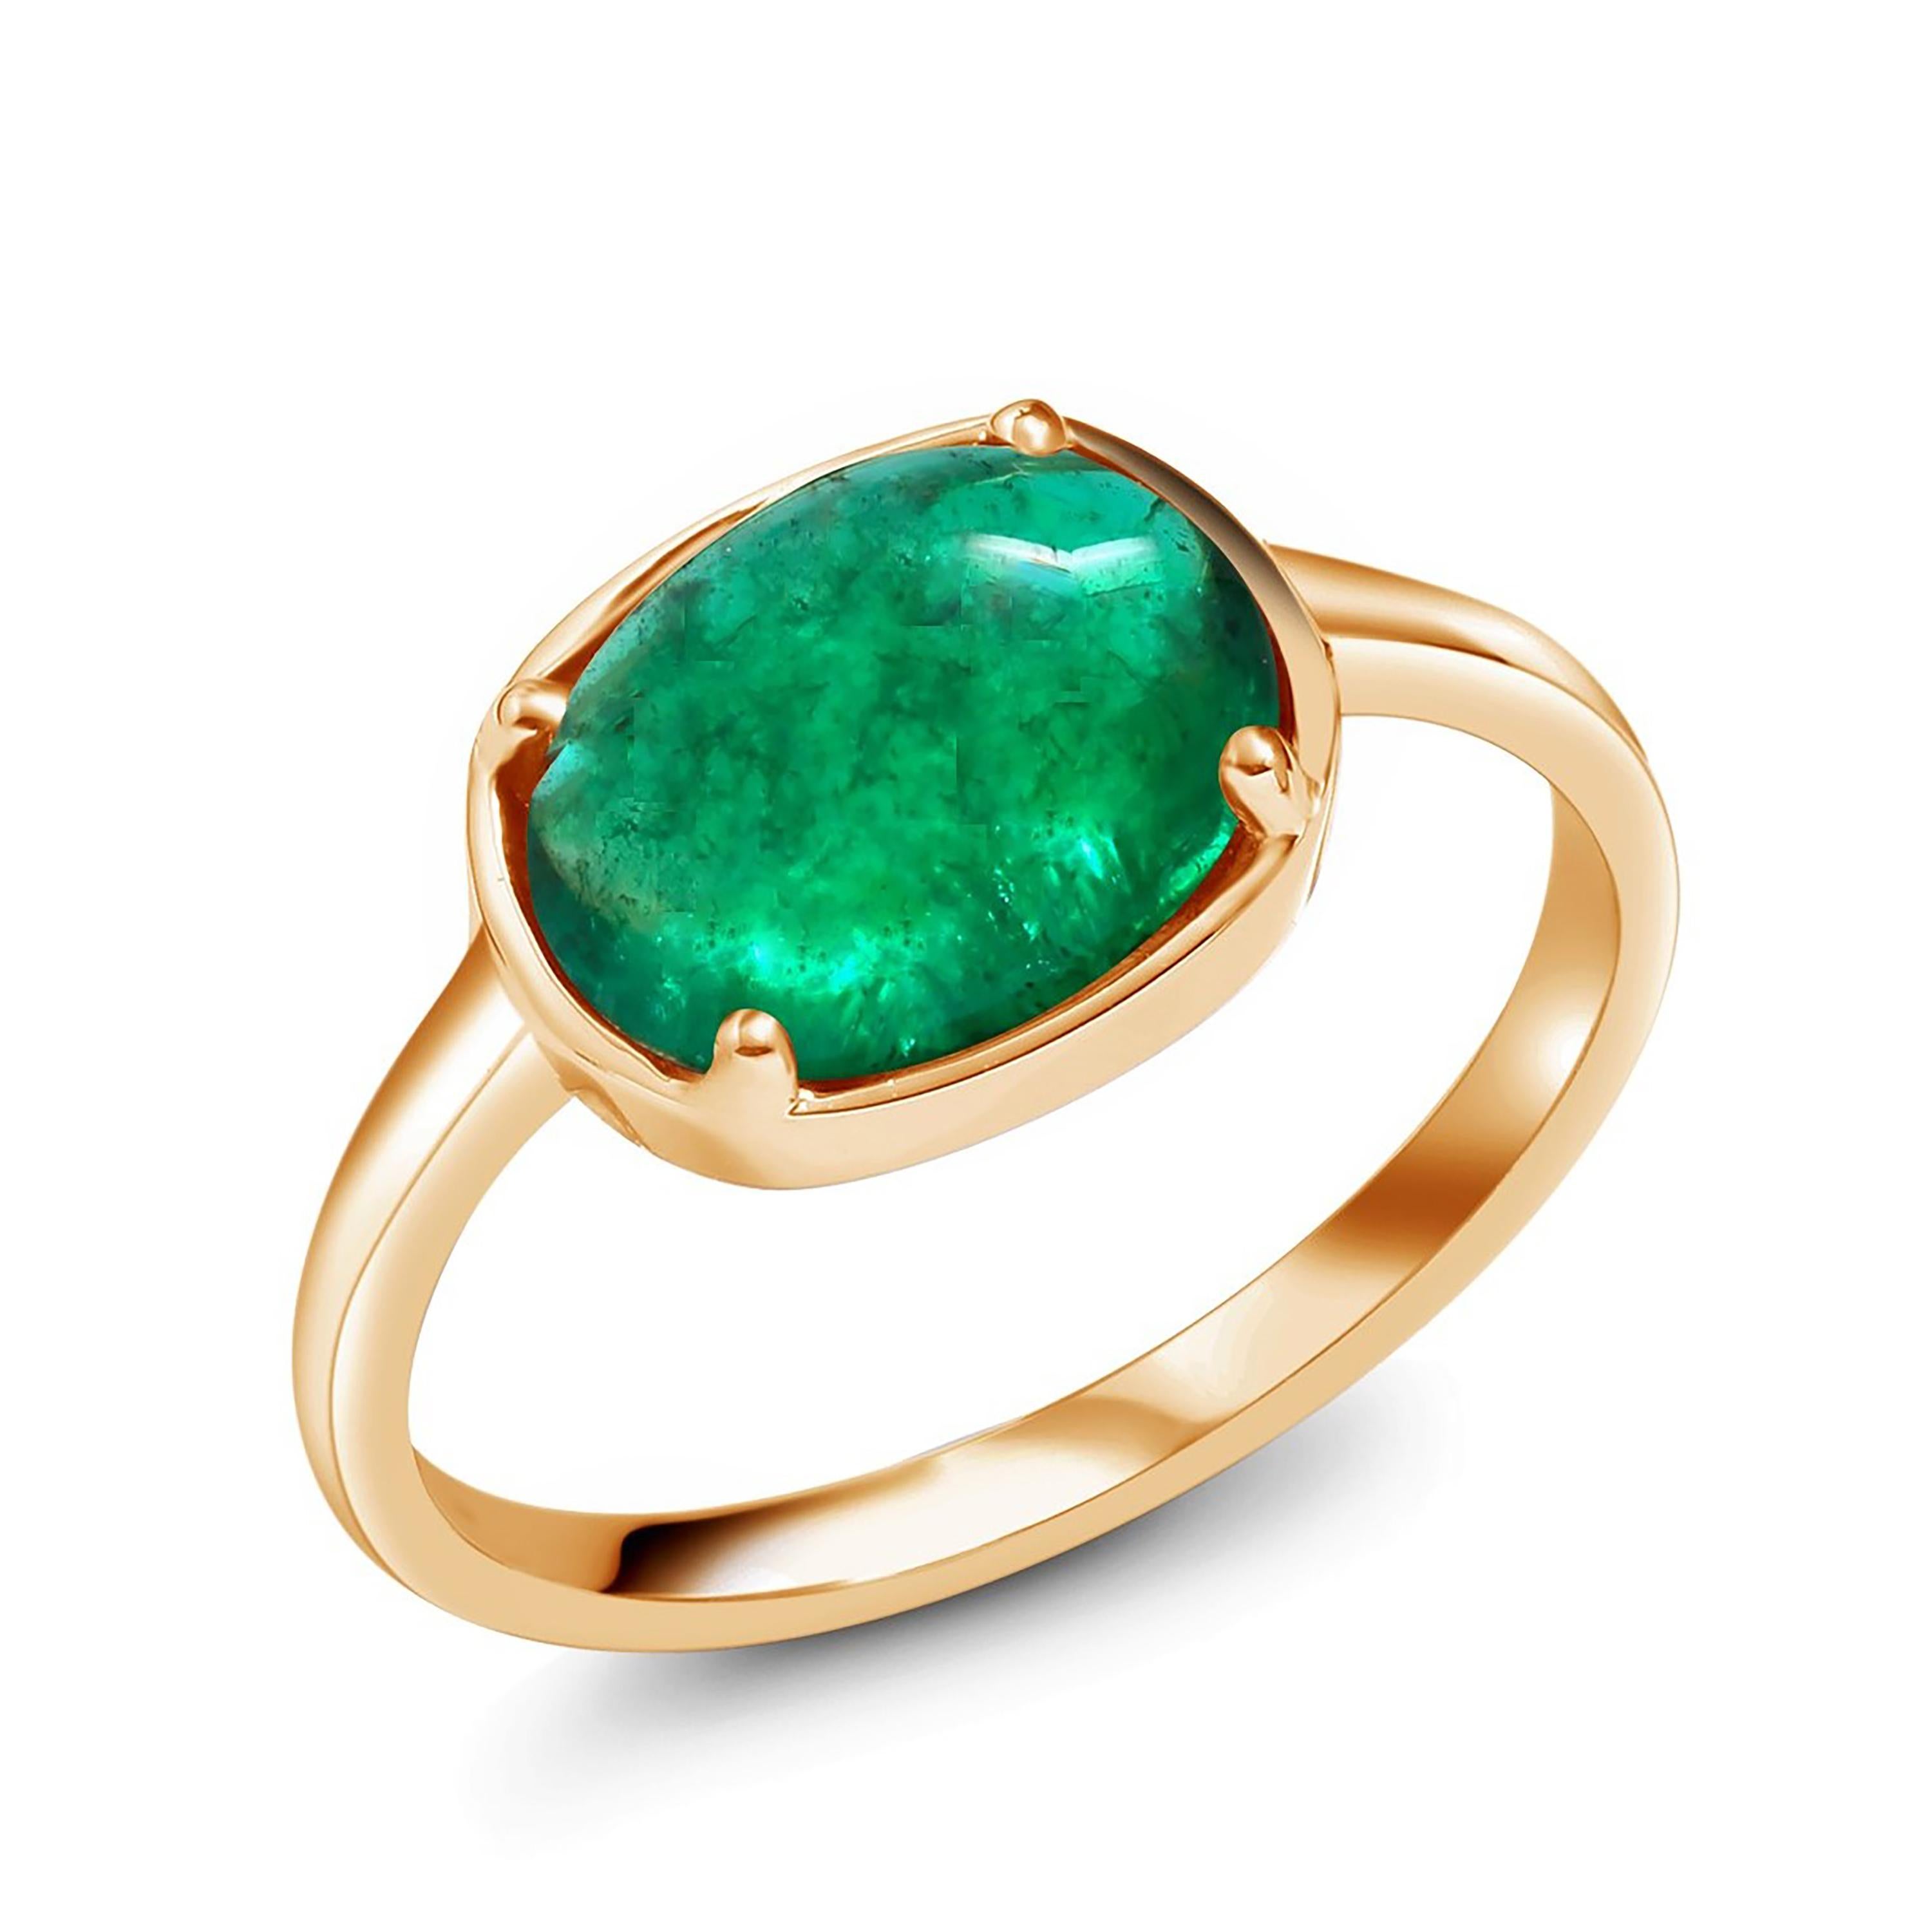 Women's Cabochon Emerald Solitaire Rose Gold Ring Weighing 2.40 Carats